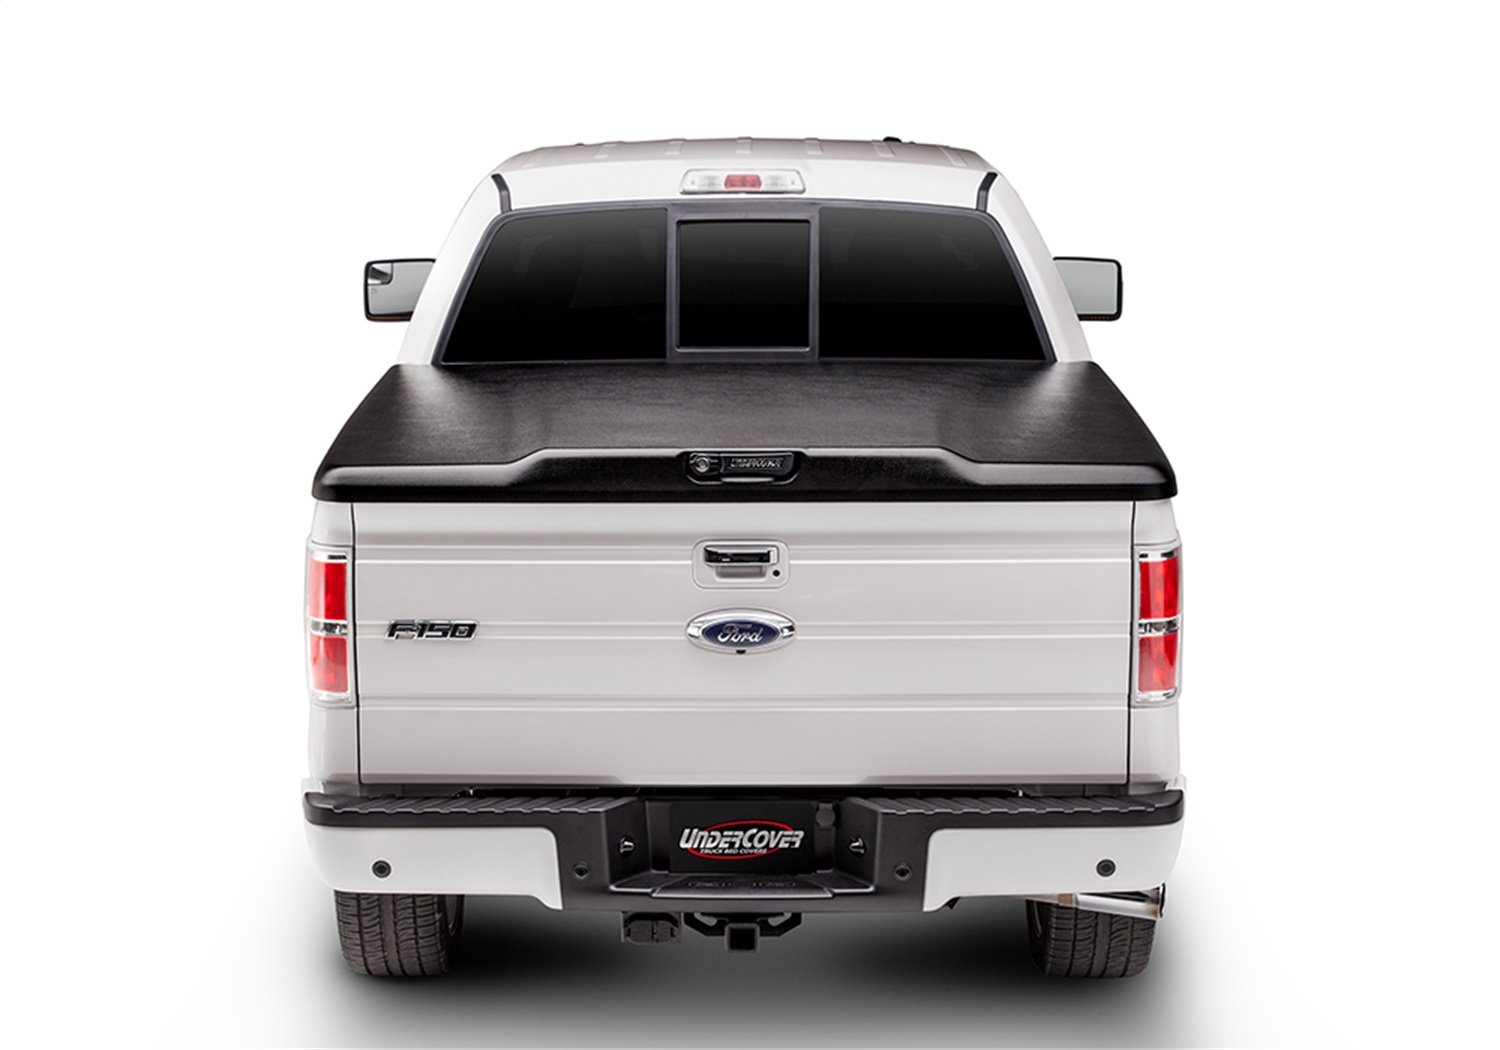 UC2138 Elite Hard Non-Folding Cover, 2009-2014 Ford F-150 6'6" Bed STD/EXT/Crew Cab, Black Textured